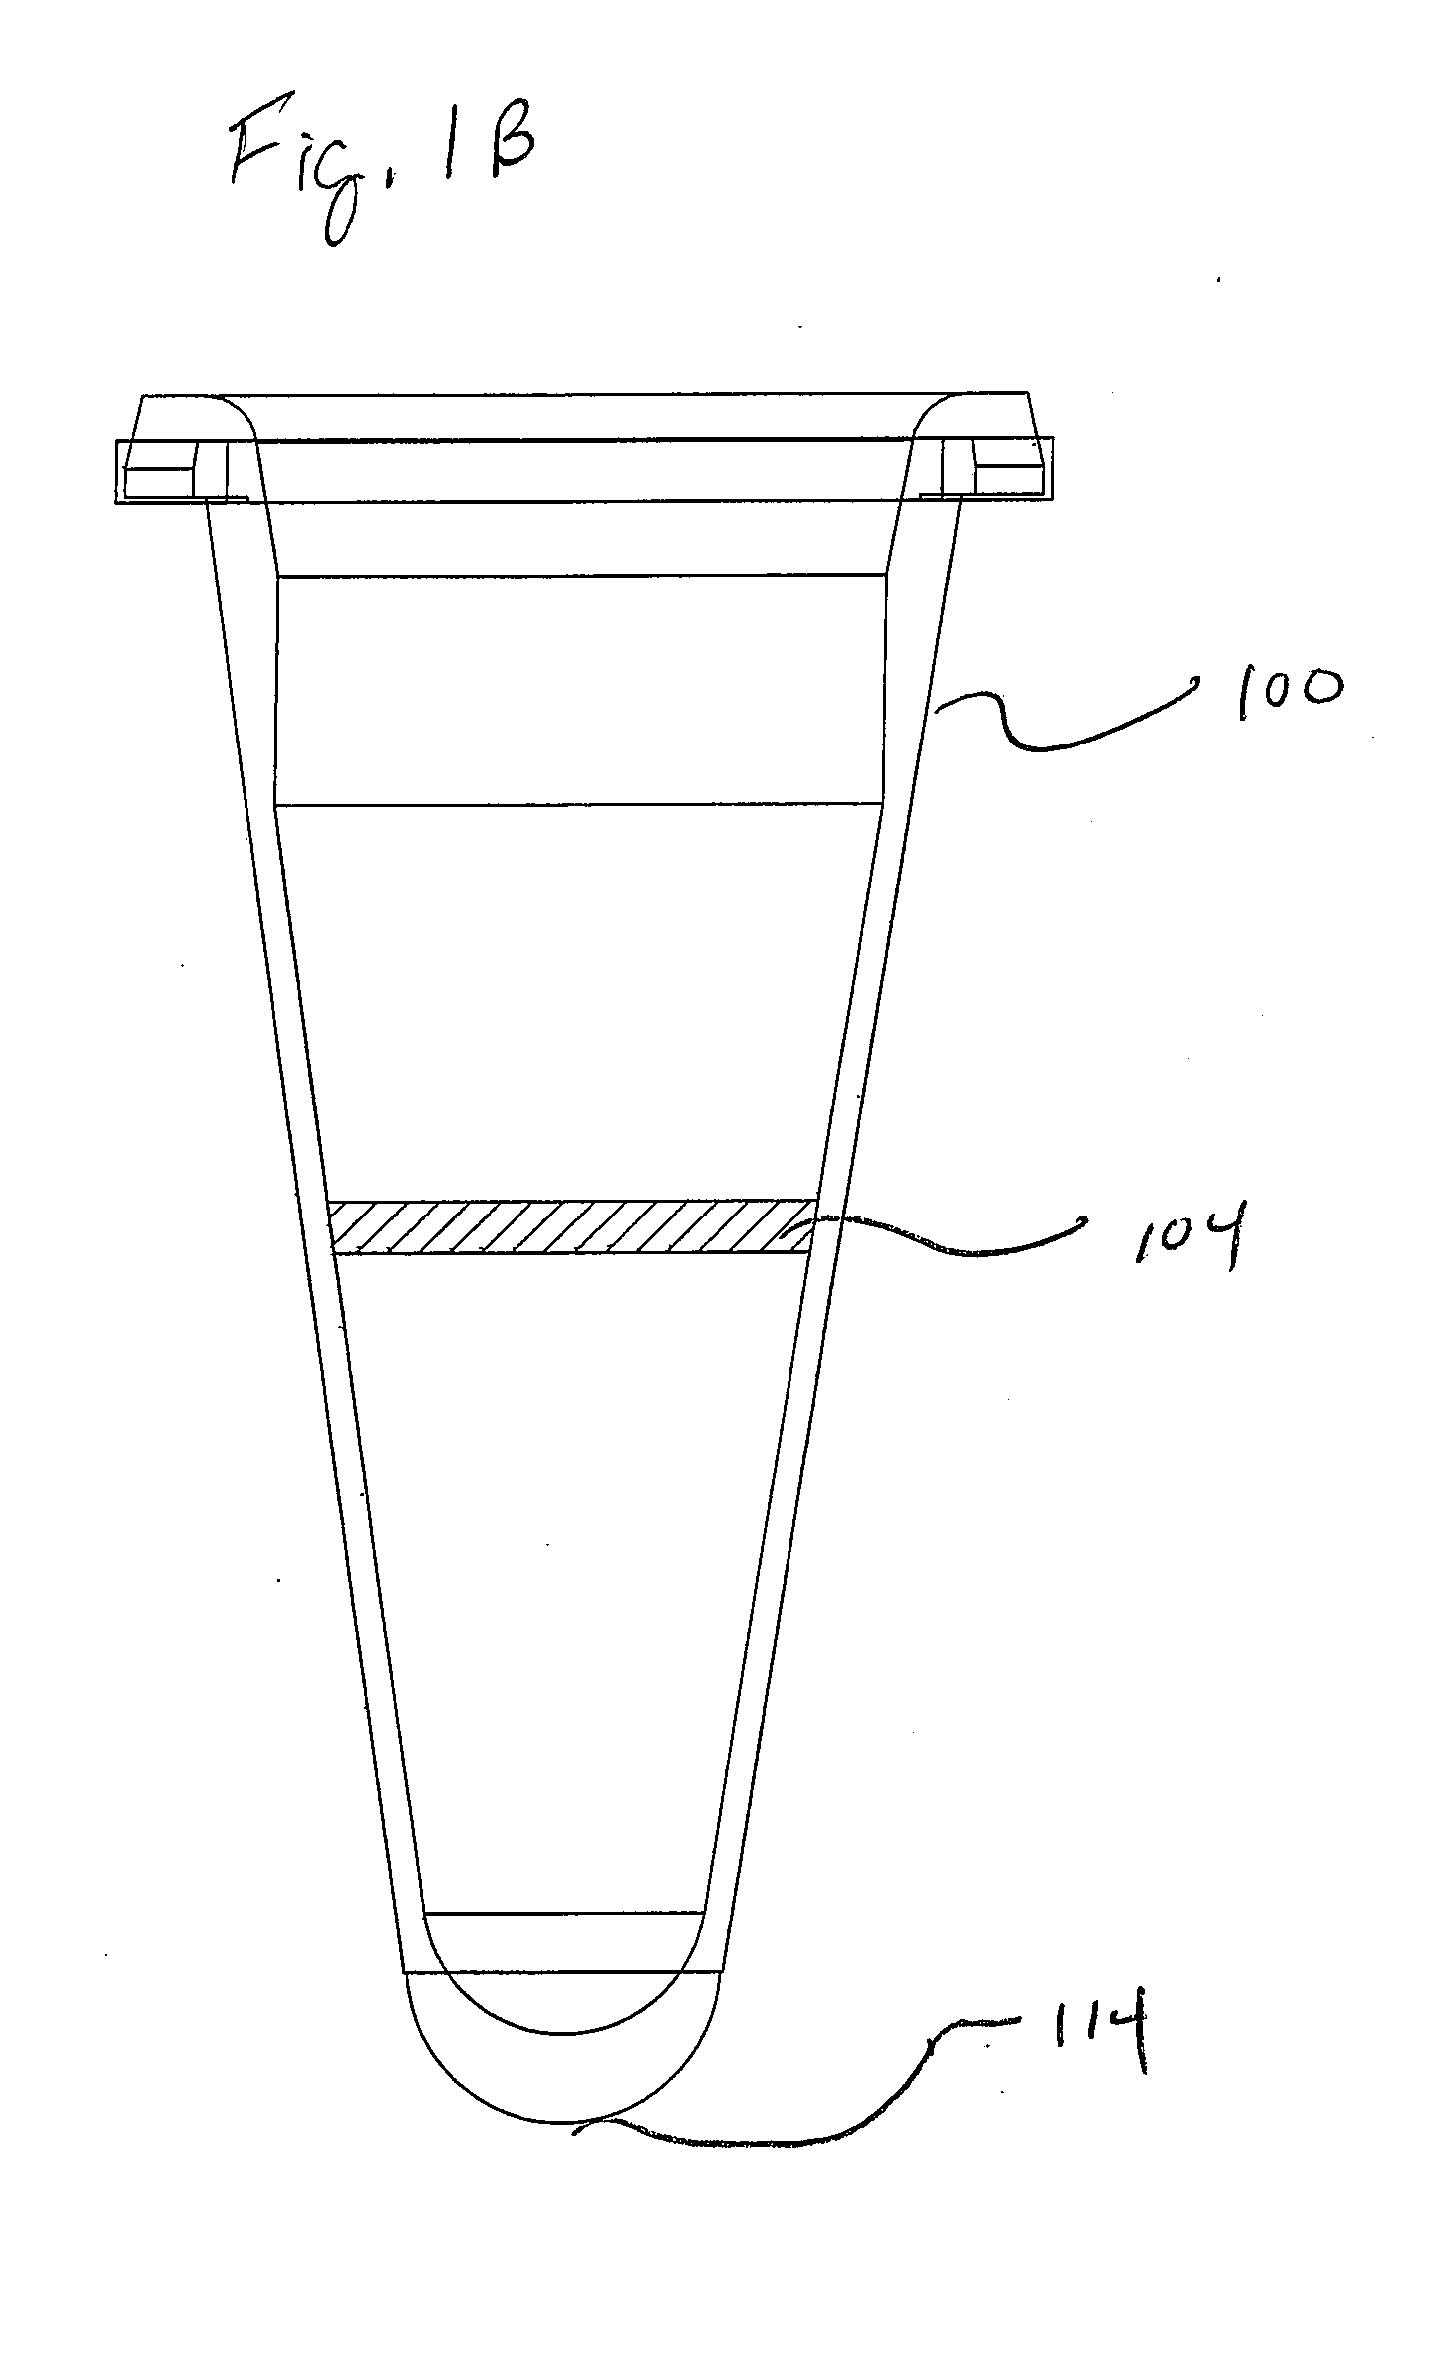 Thermocycler seal composition, method, and application